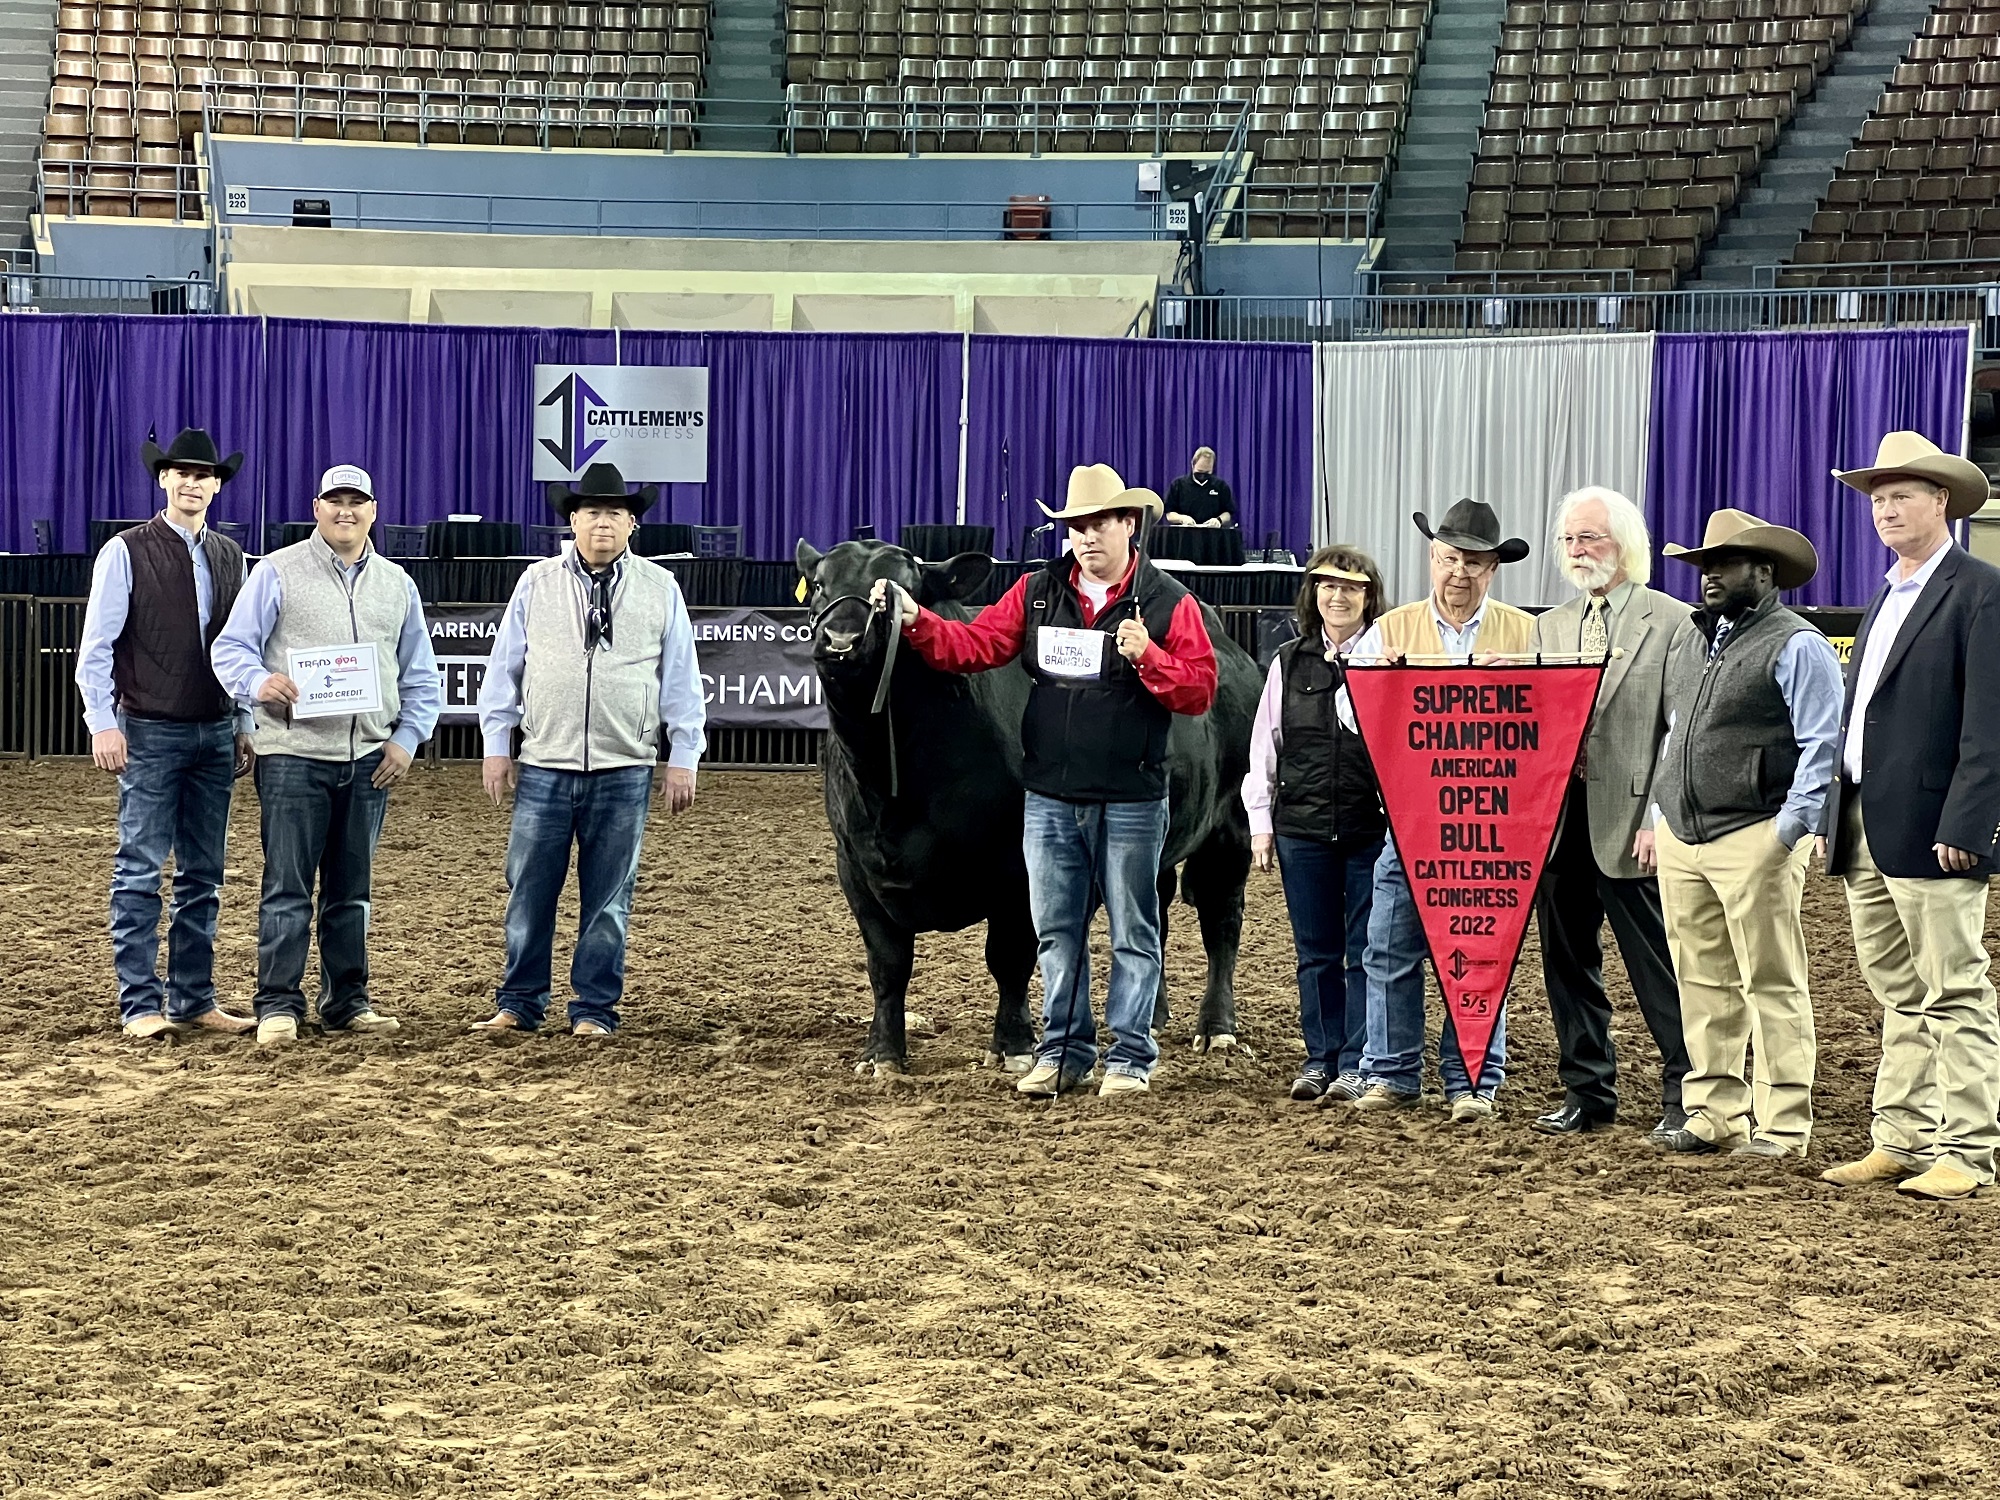 American Supreme Champions All Hail from Texas at Cattlemen's Congress